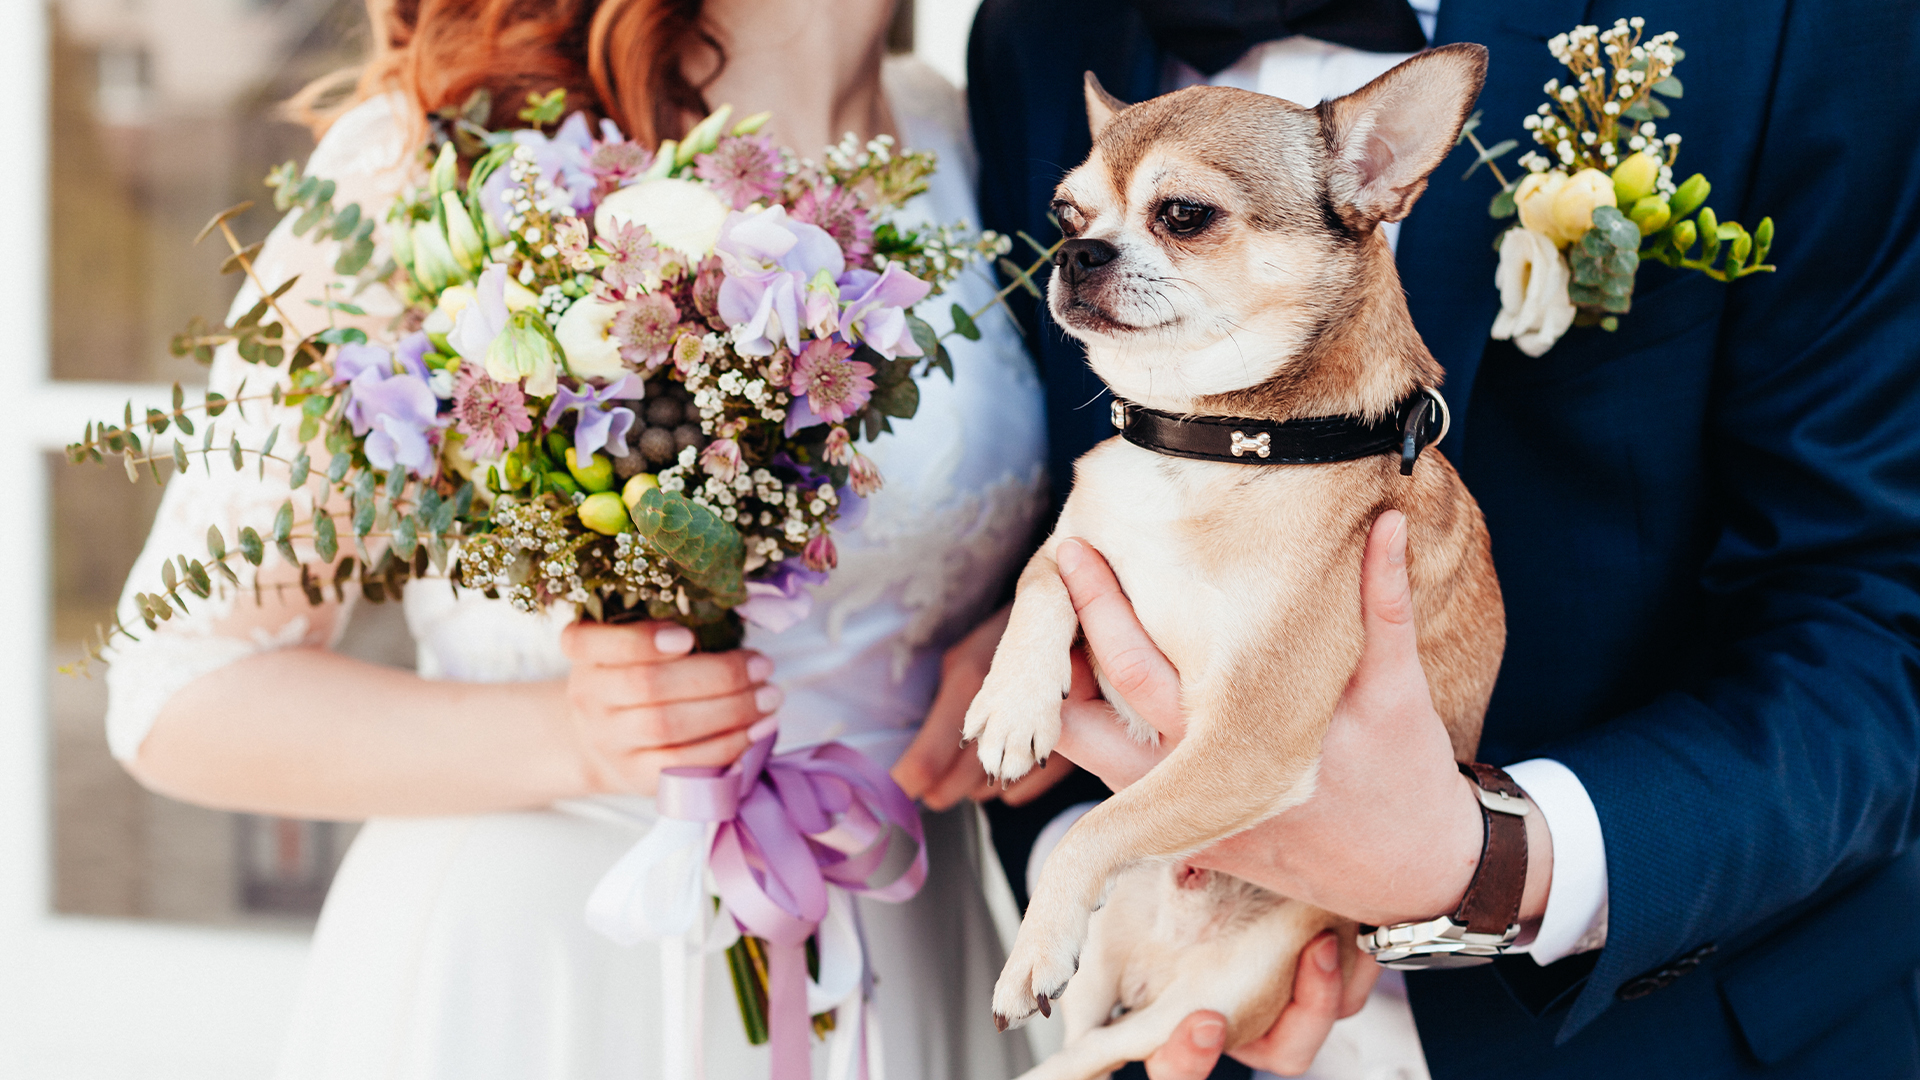 Little dog at the wedding